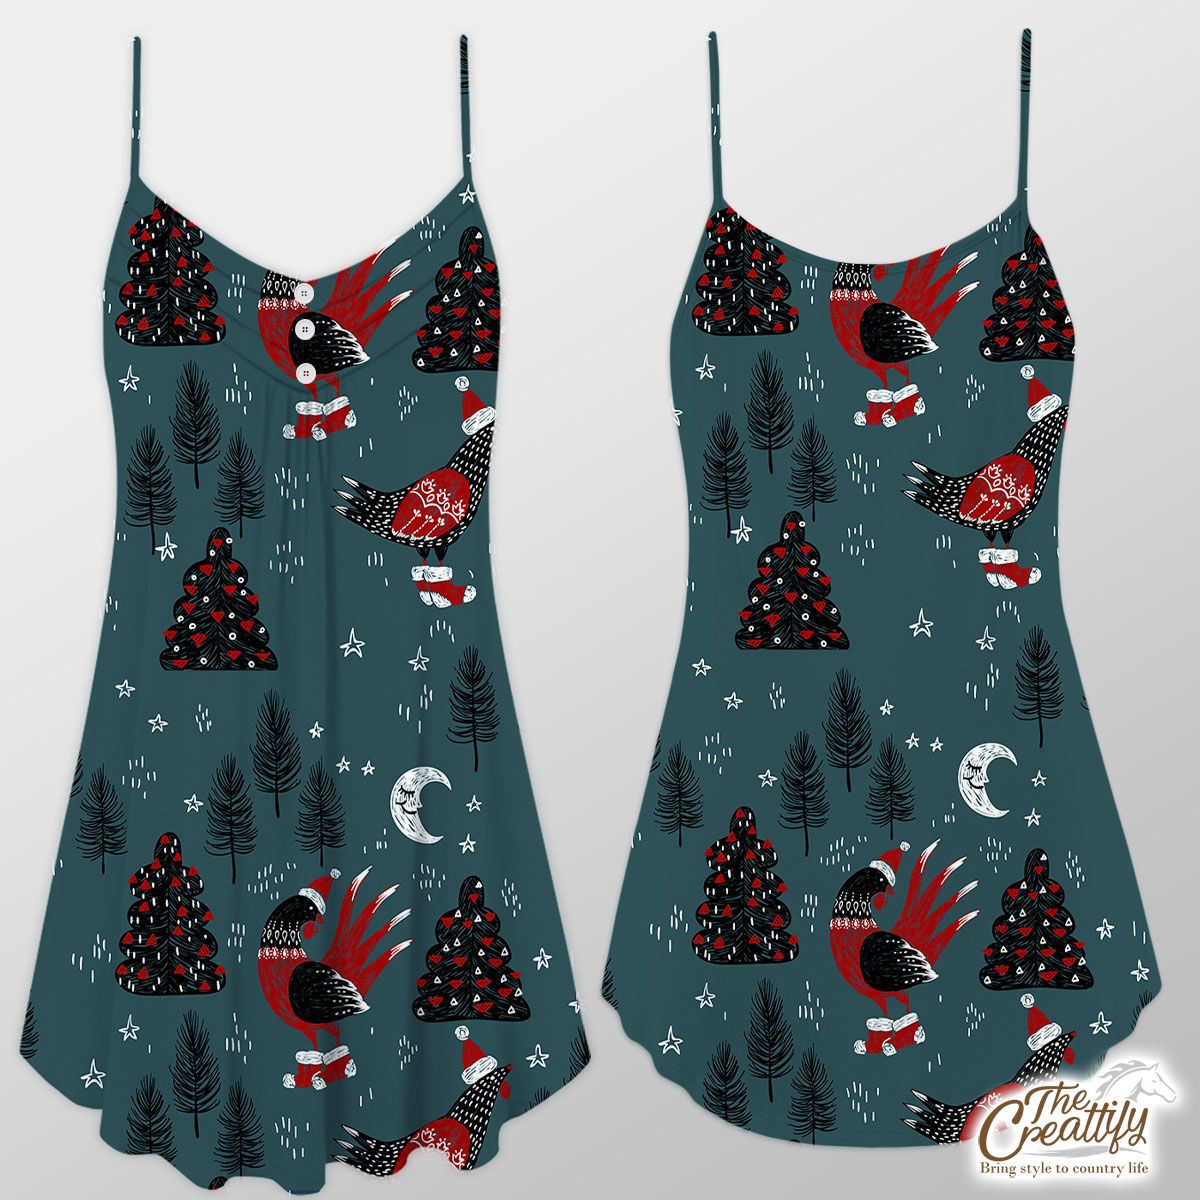 Christmas Turkey With Santa Hat, Sweater And Red Socks On The Pine Tree Background Suspender Dress